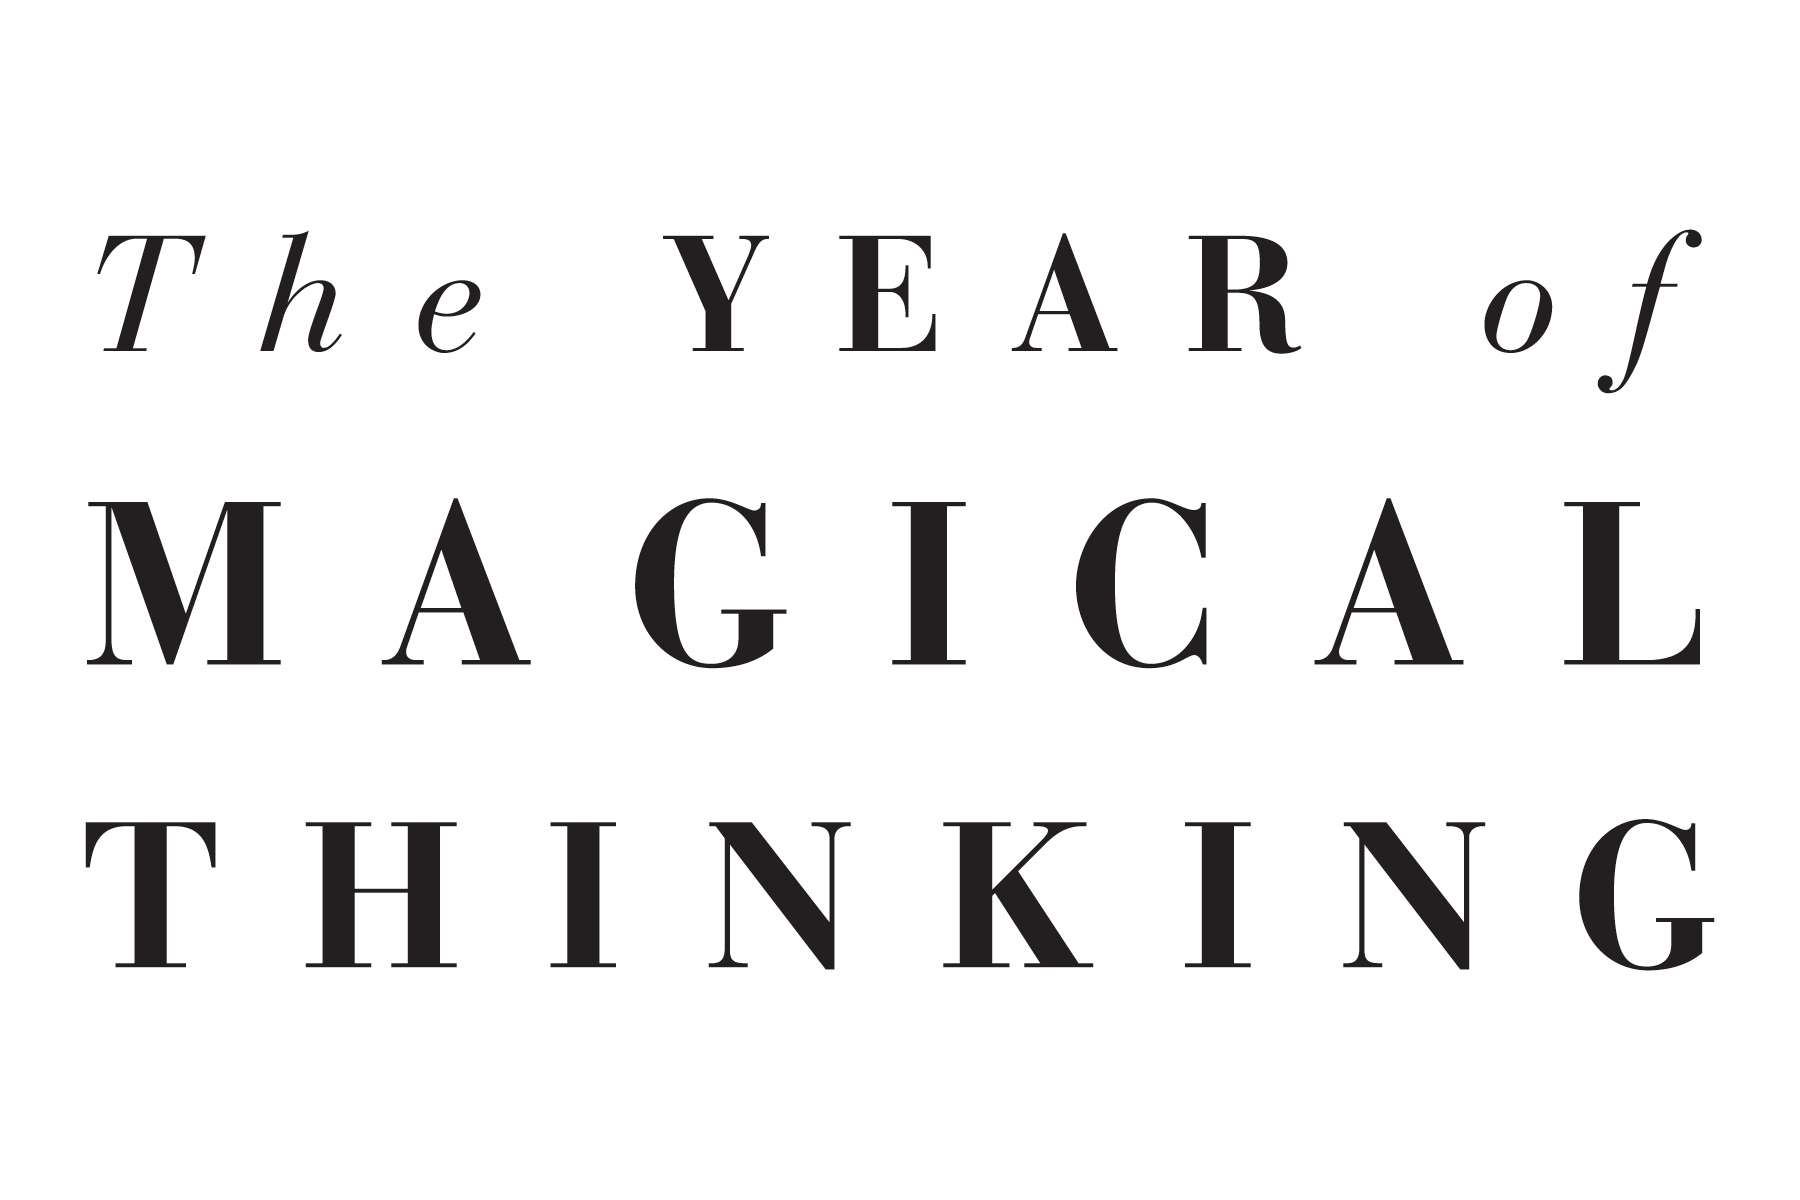 The Year of Magical Thinking Title Treatment